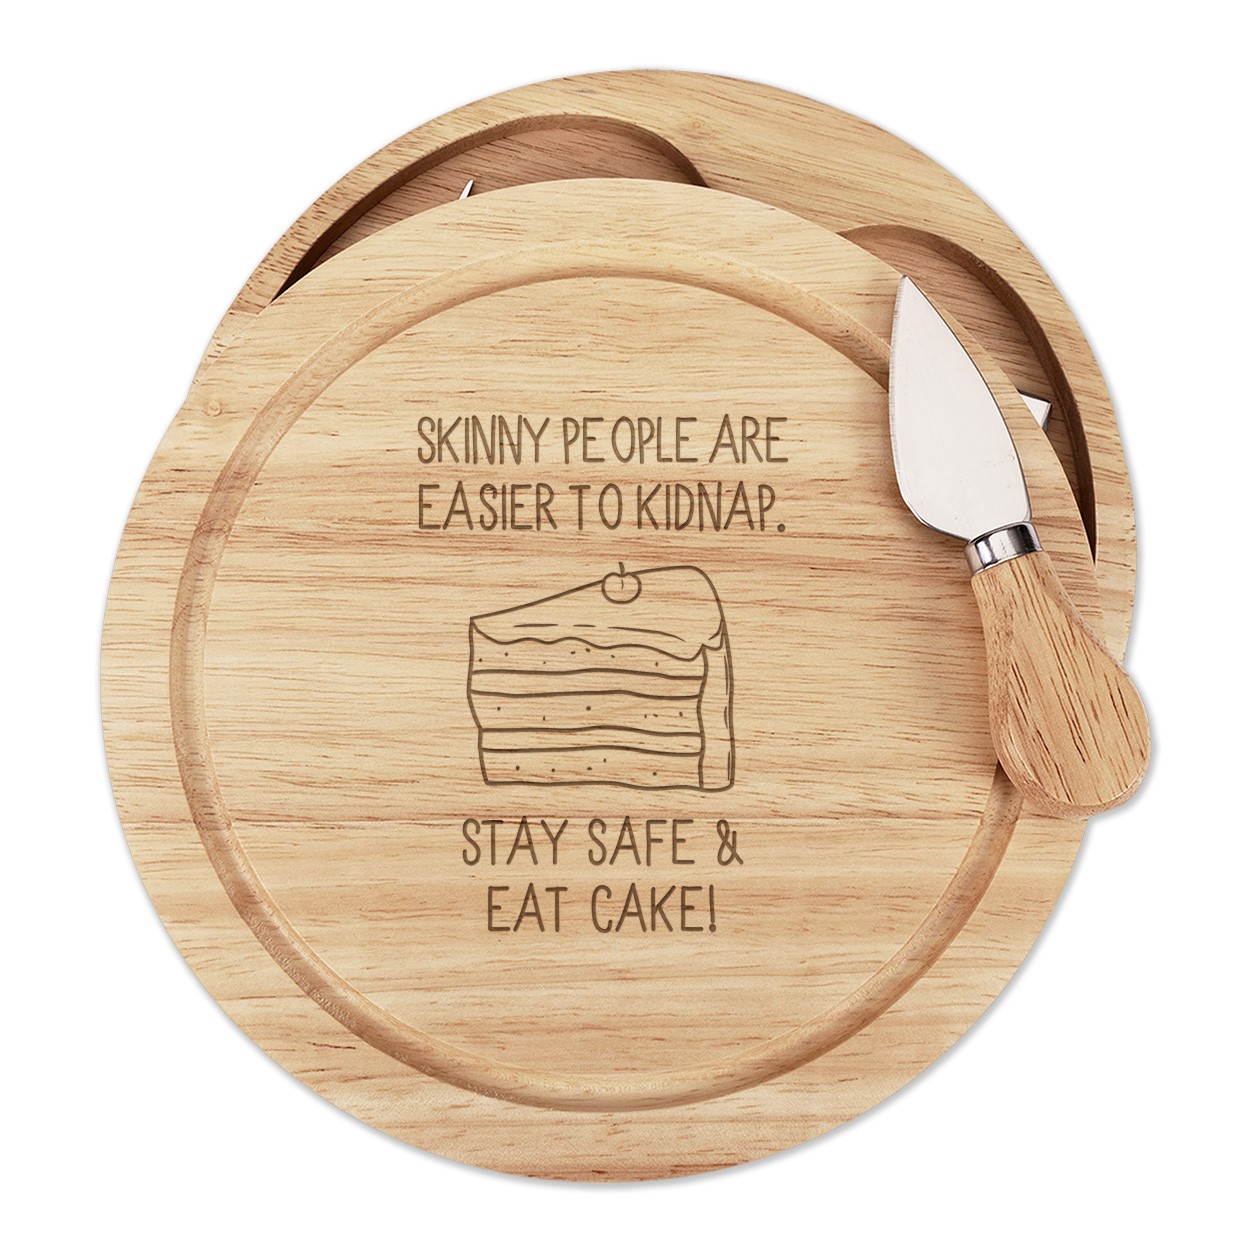 Skinny People Are Easier To Kidnap Stay Safe & Eat Cake Wooden Cheese Board Set 4 Knives